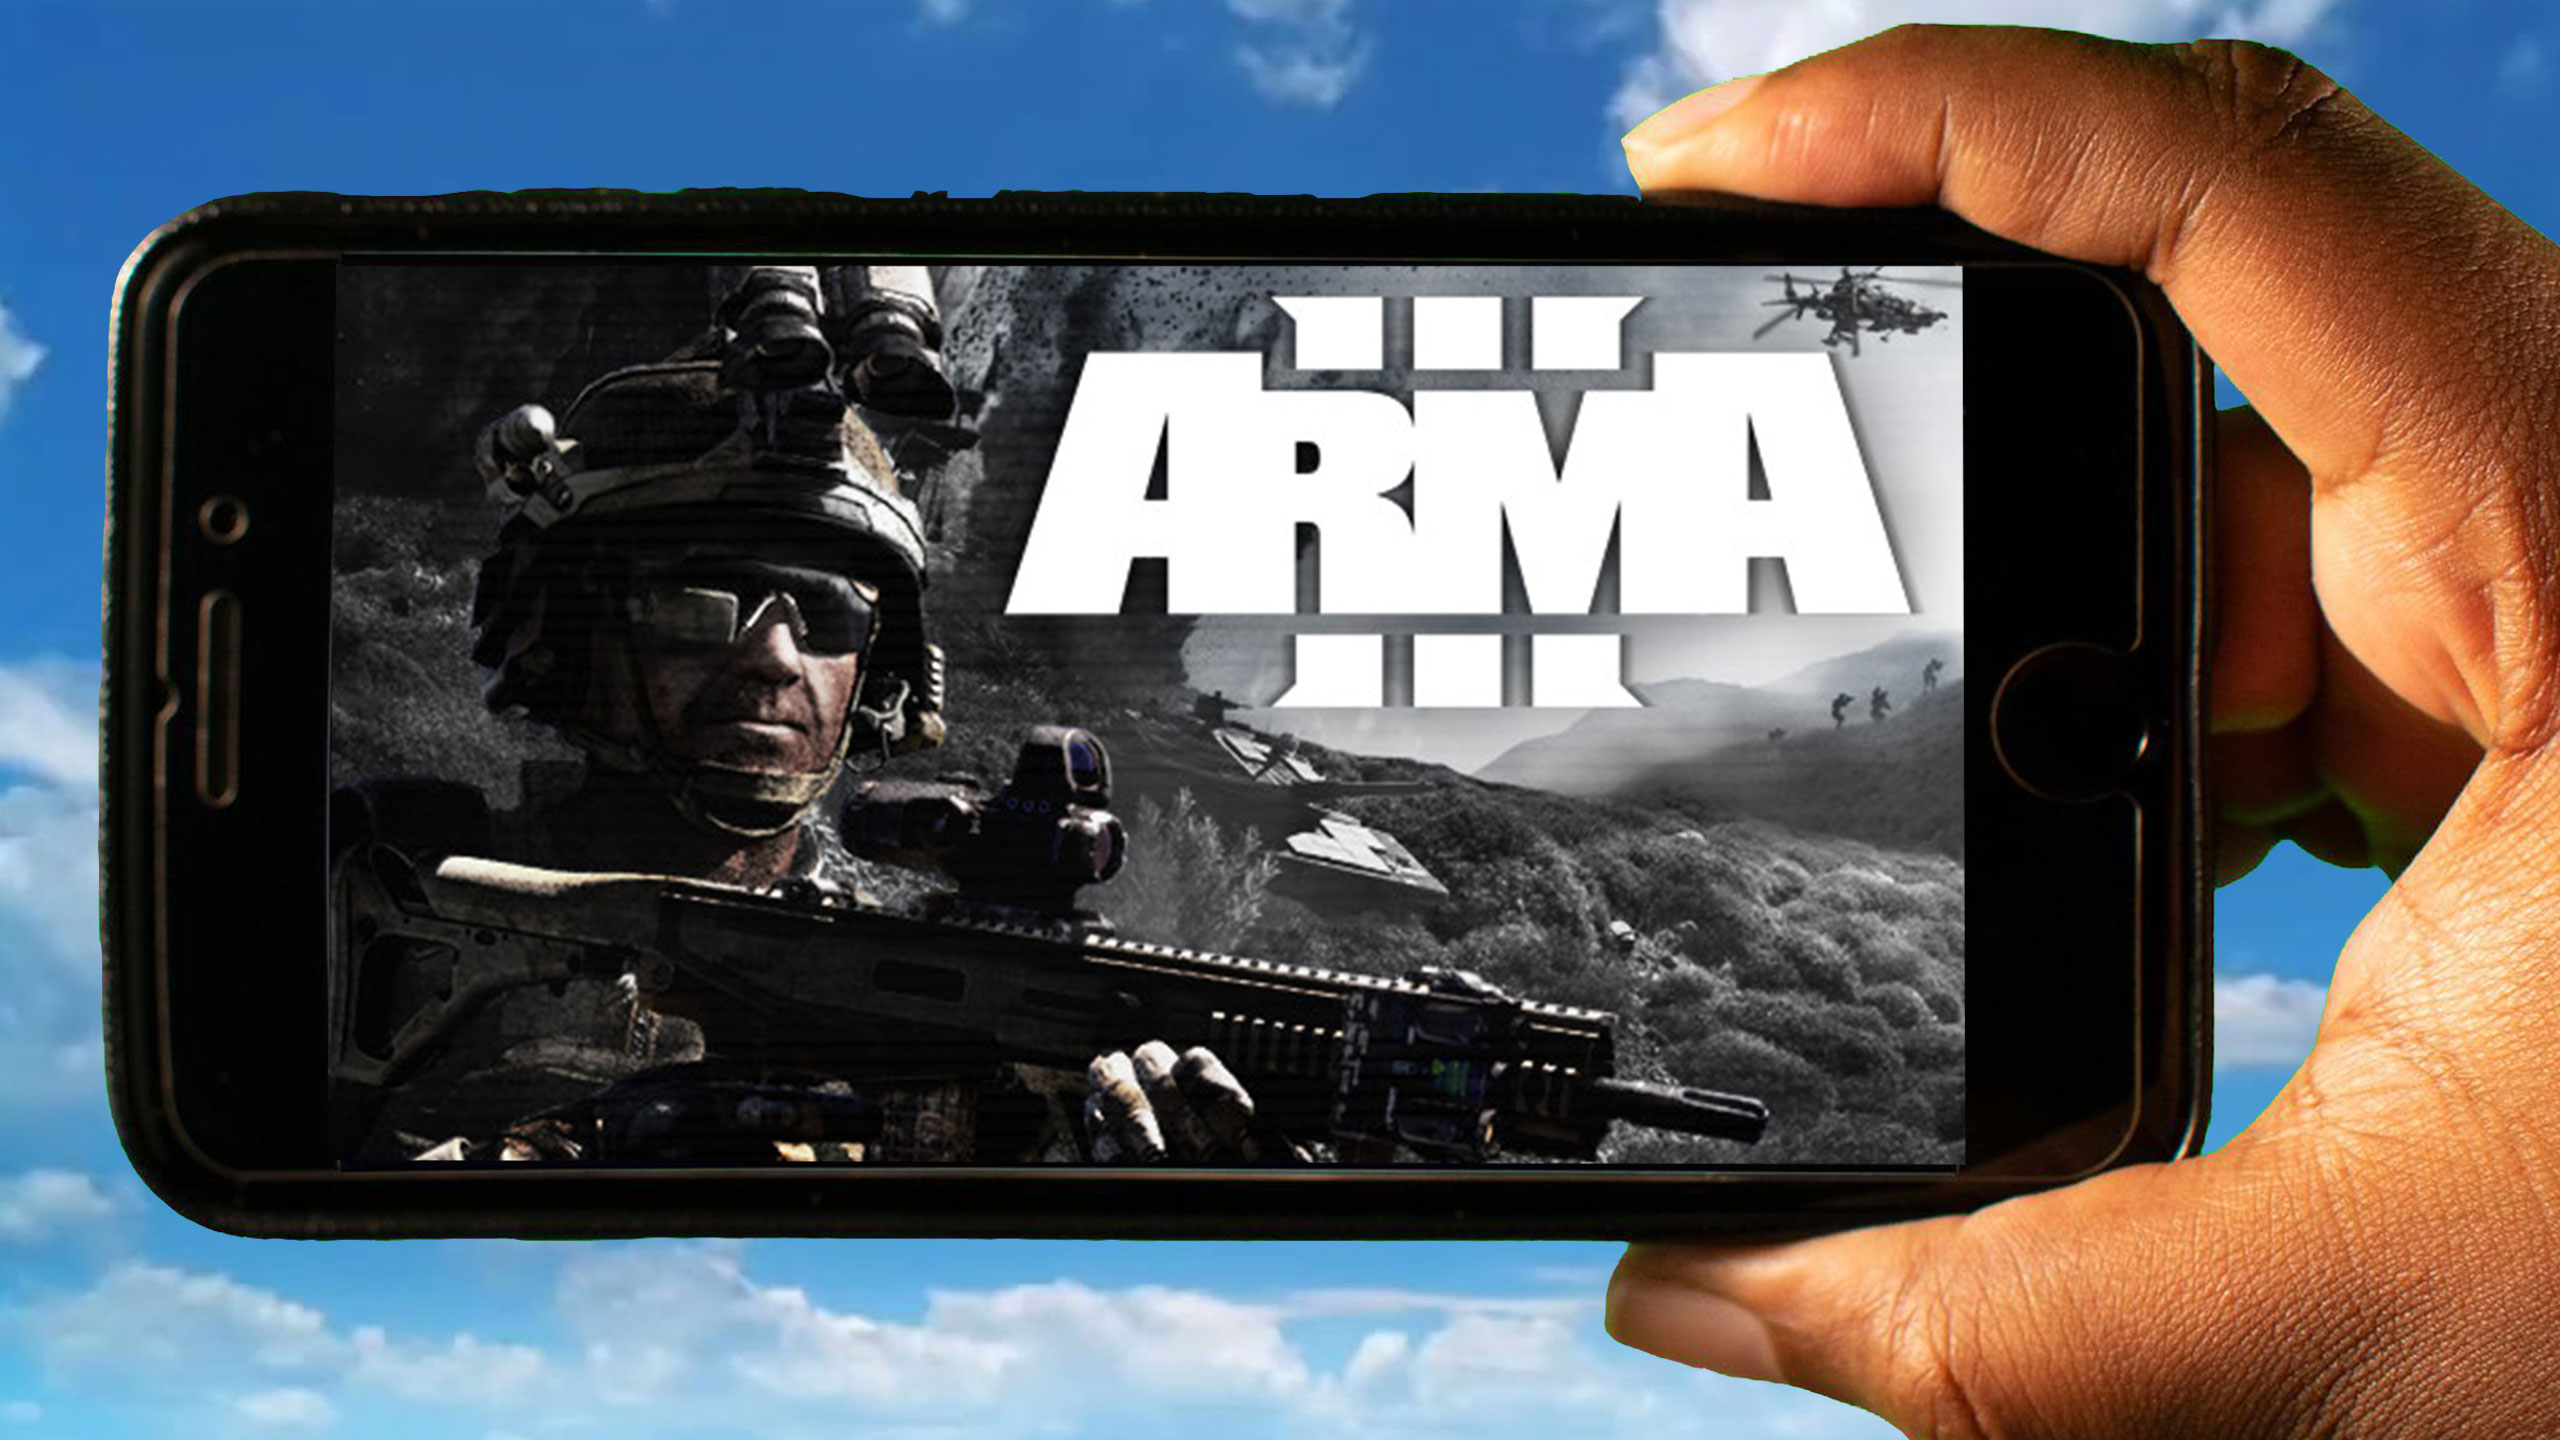 ARMA 3 ON ANDROID